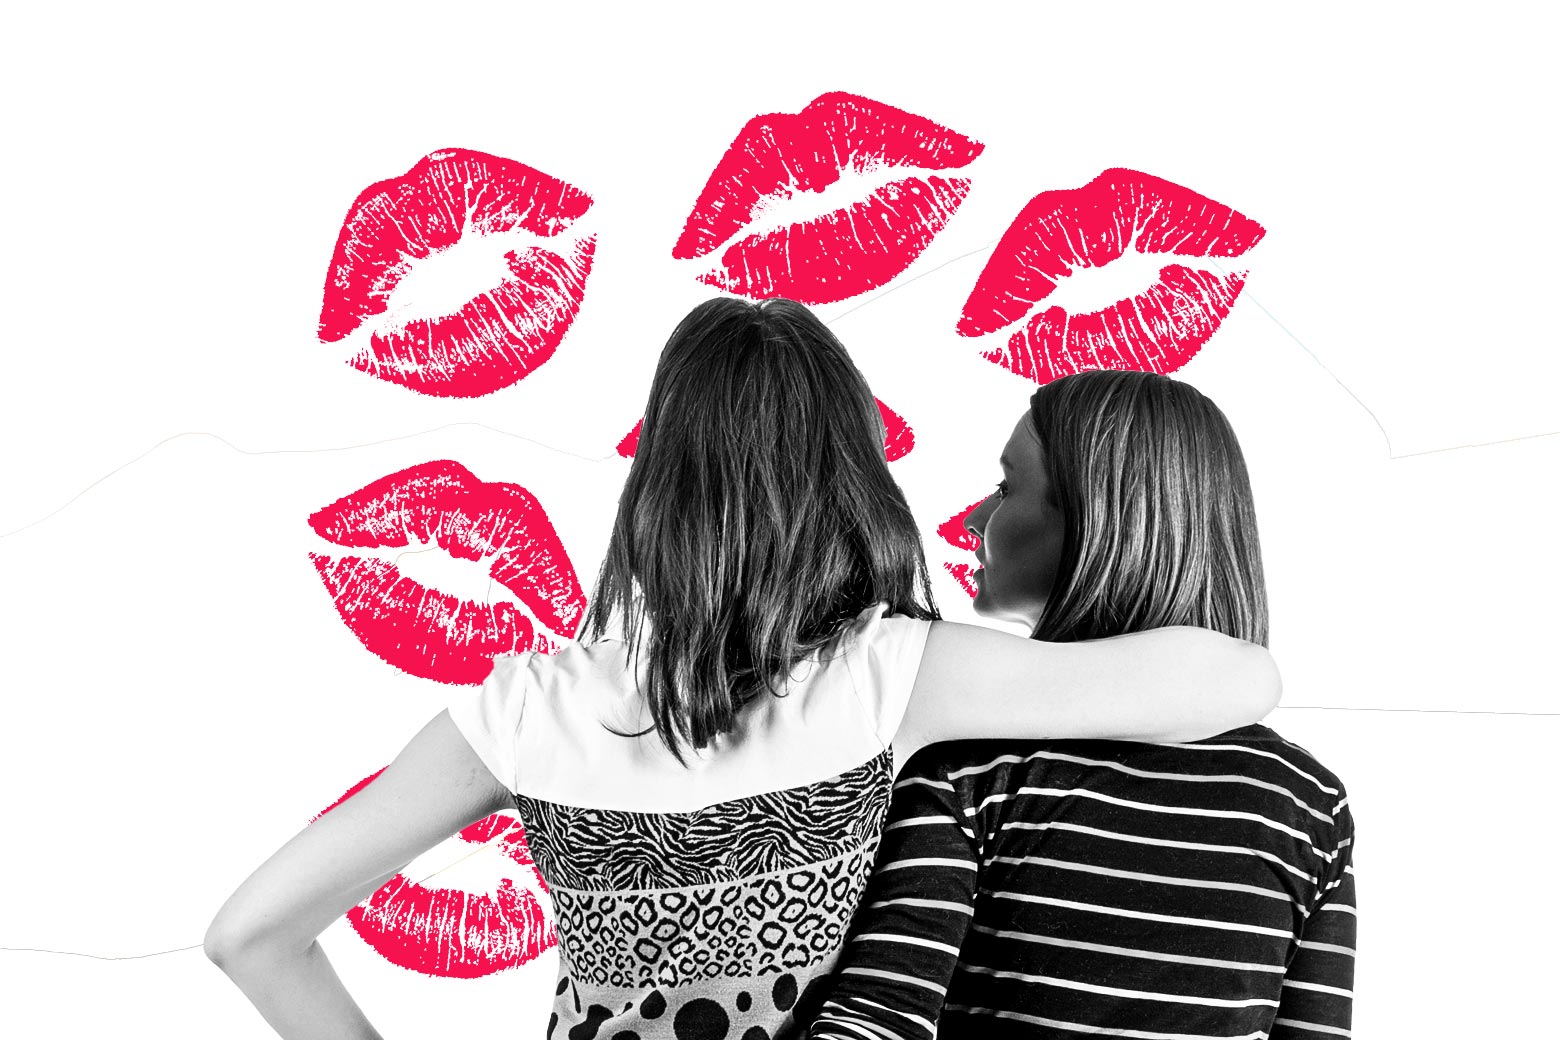 One person puts their arm around the other in front of a background of illustrated kisses.